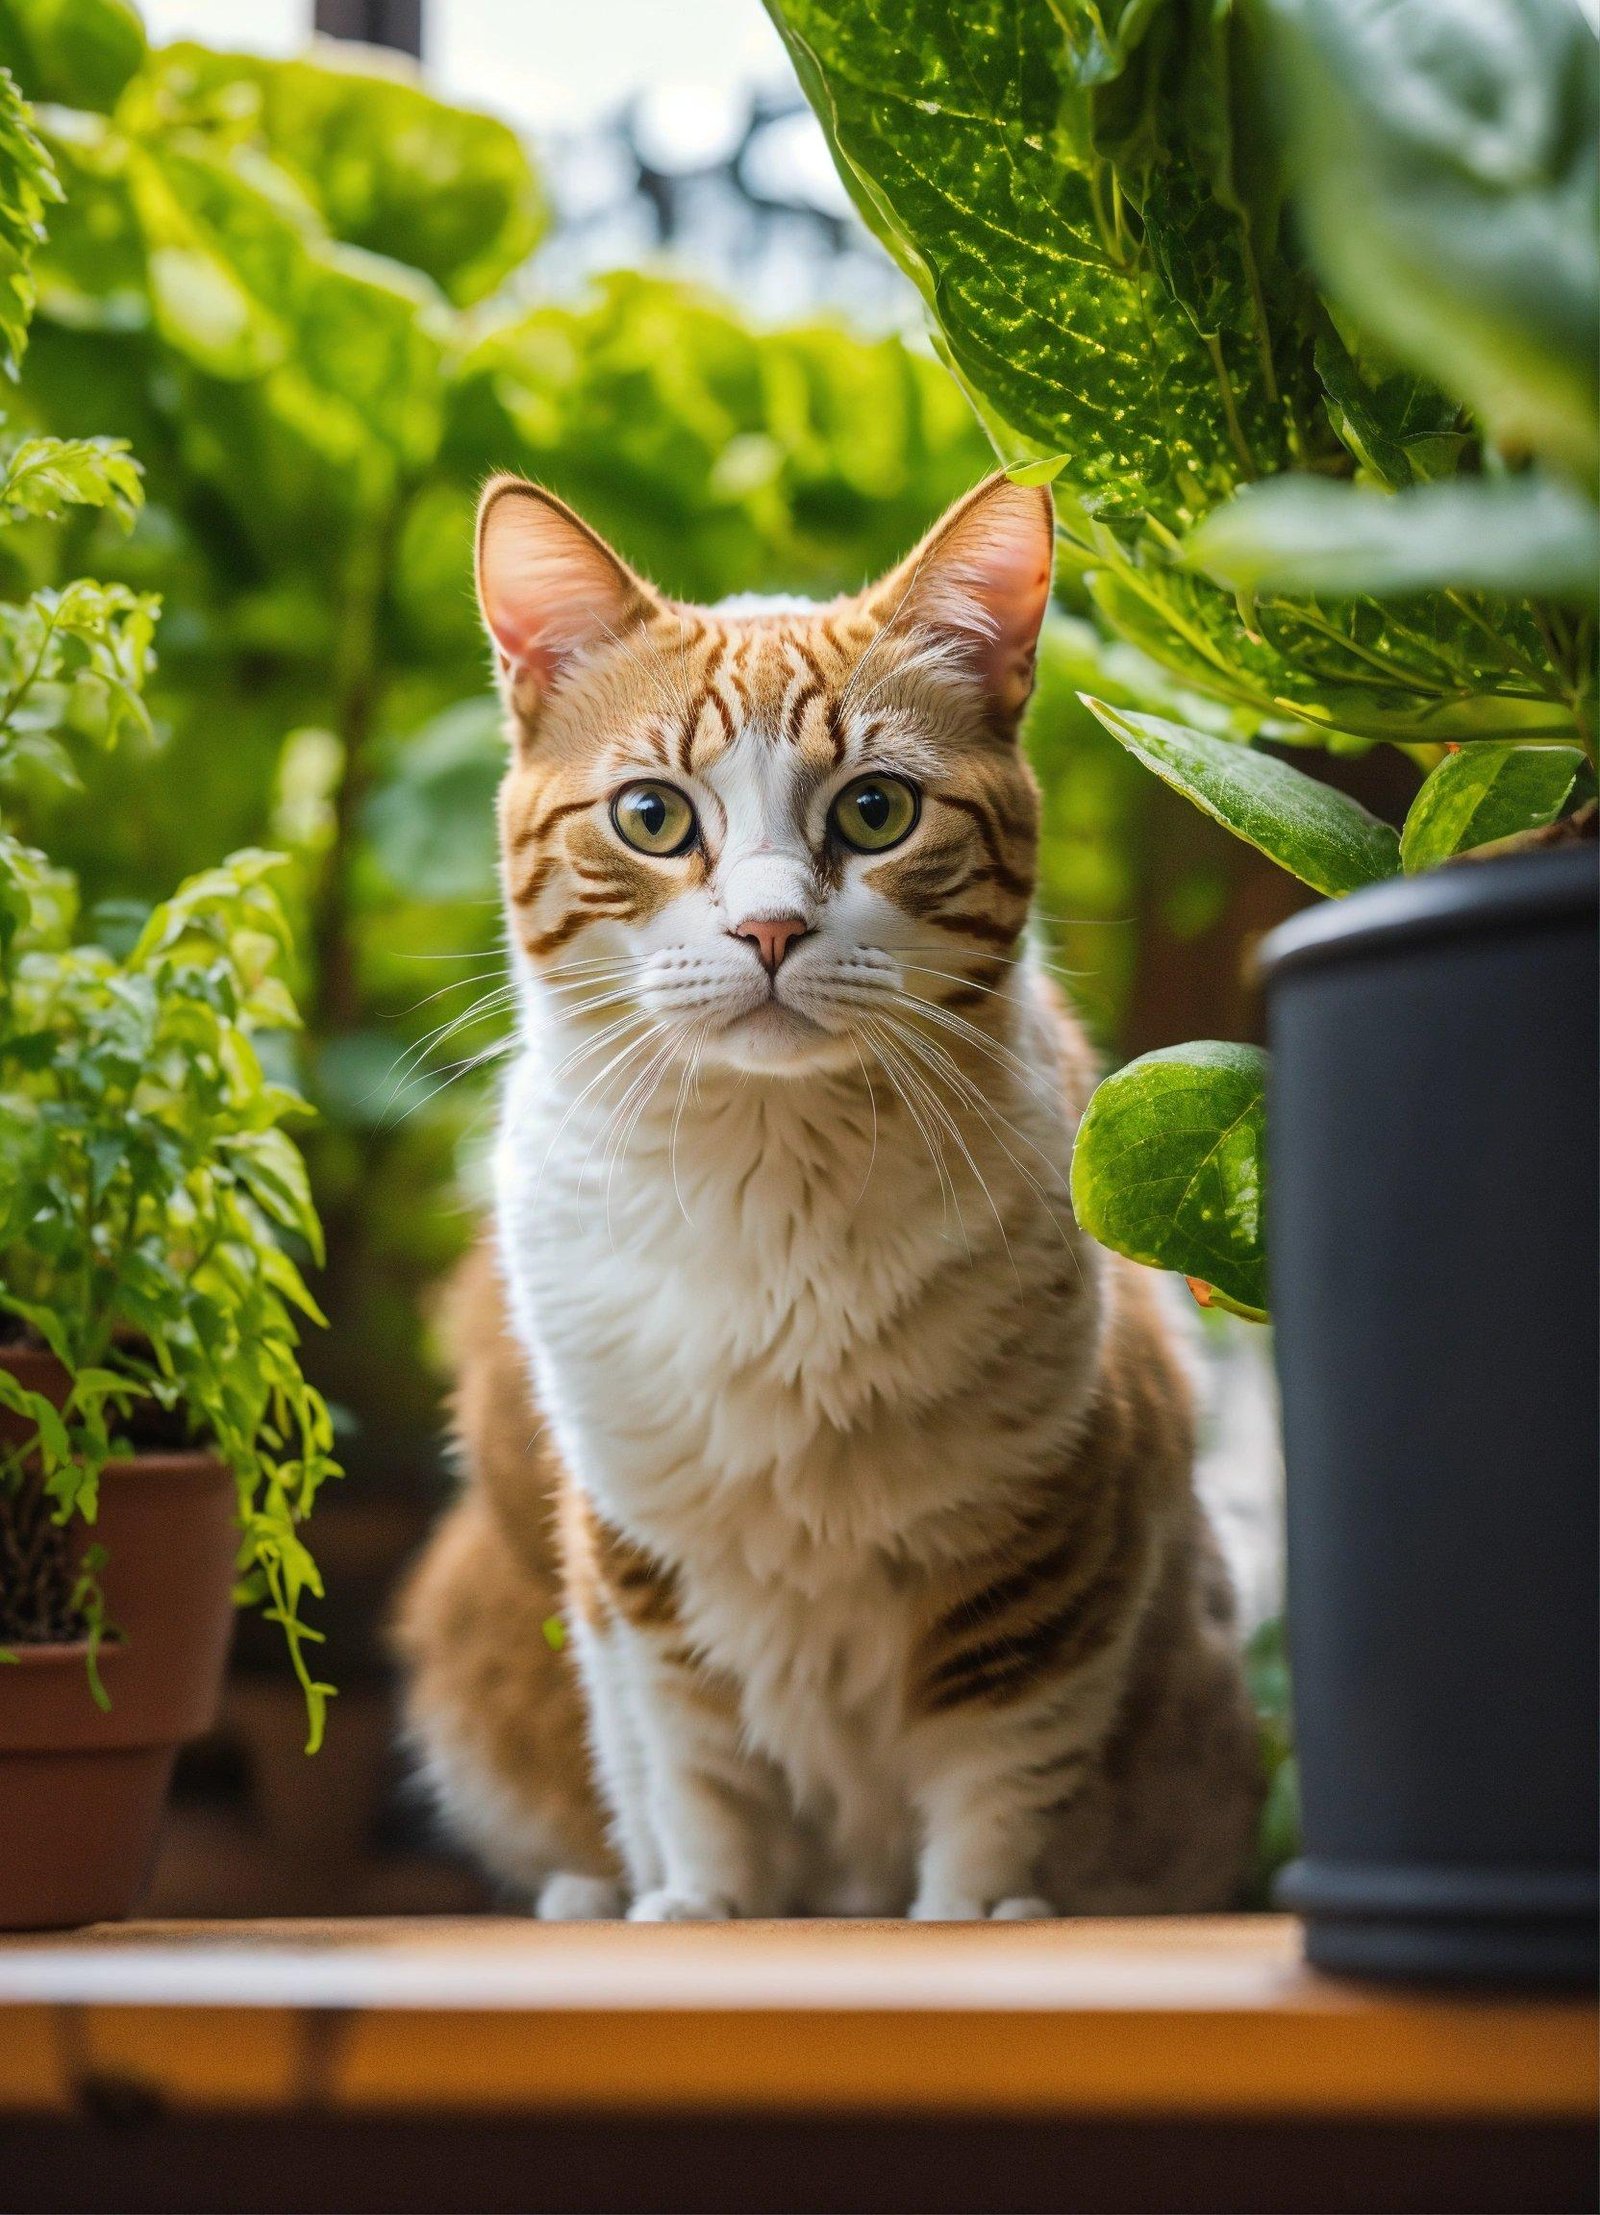 are snake plants toxic to cats?